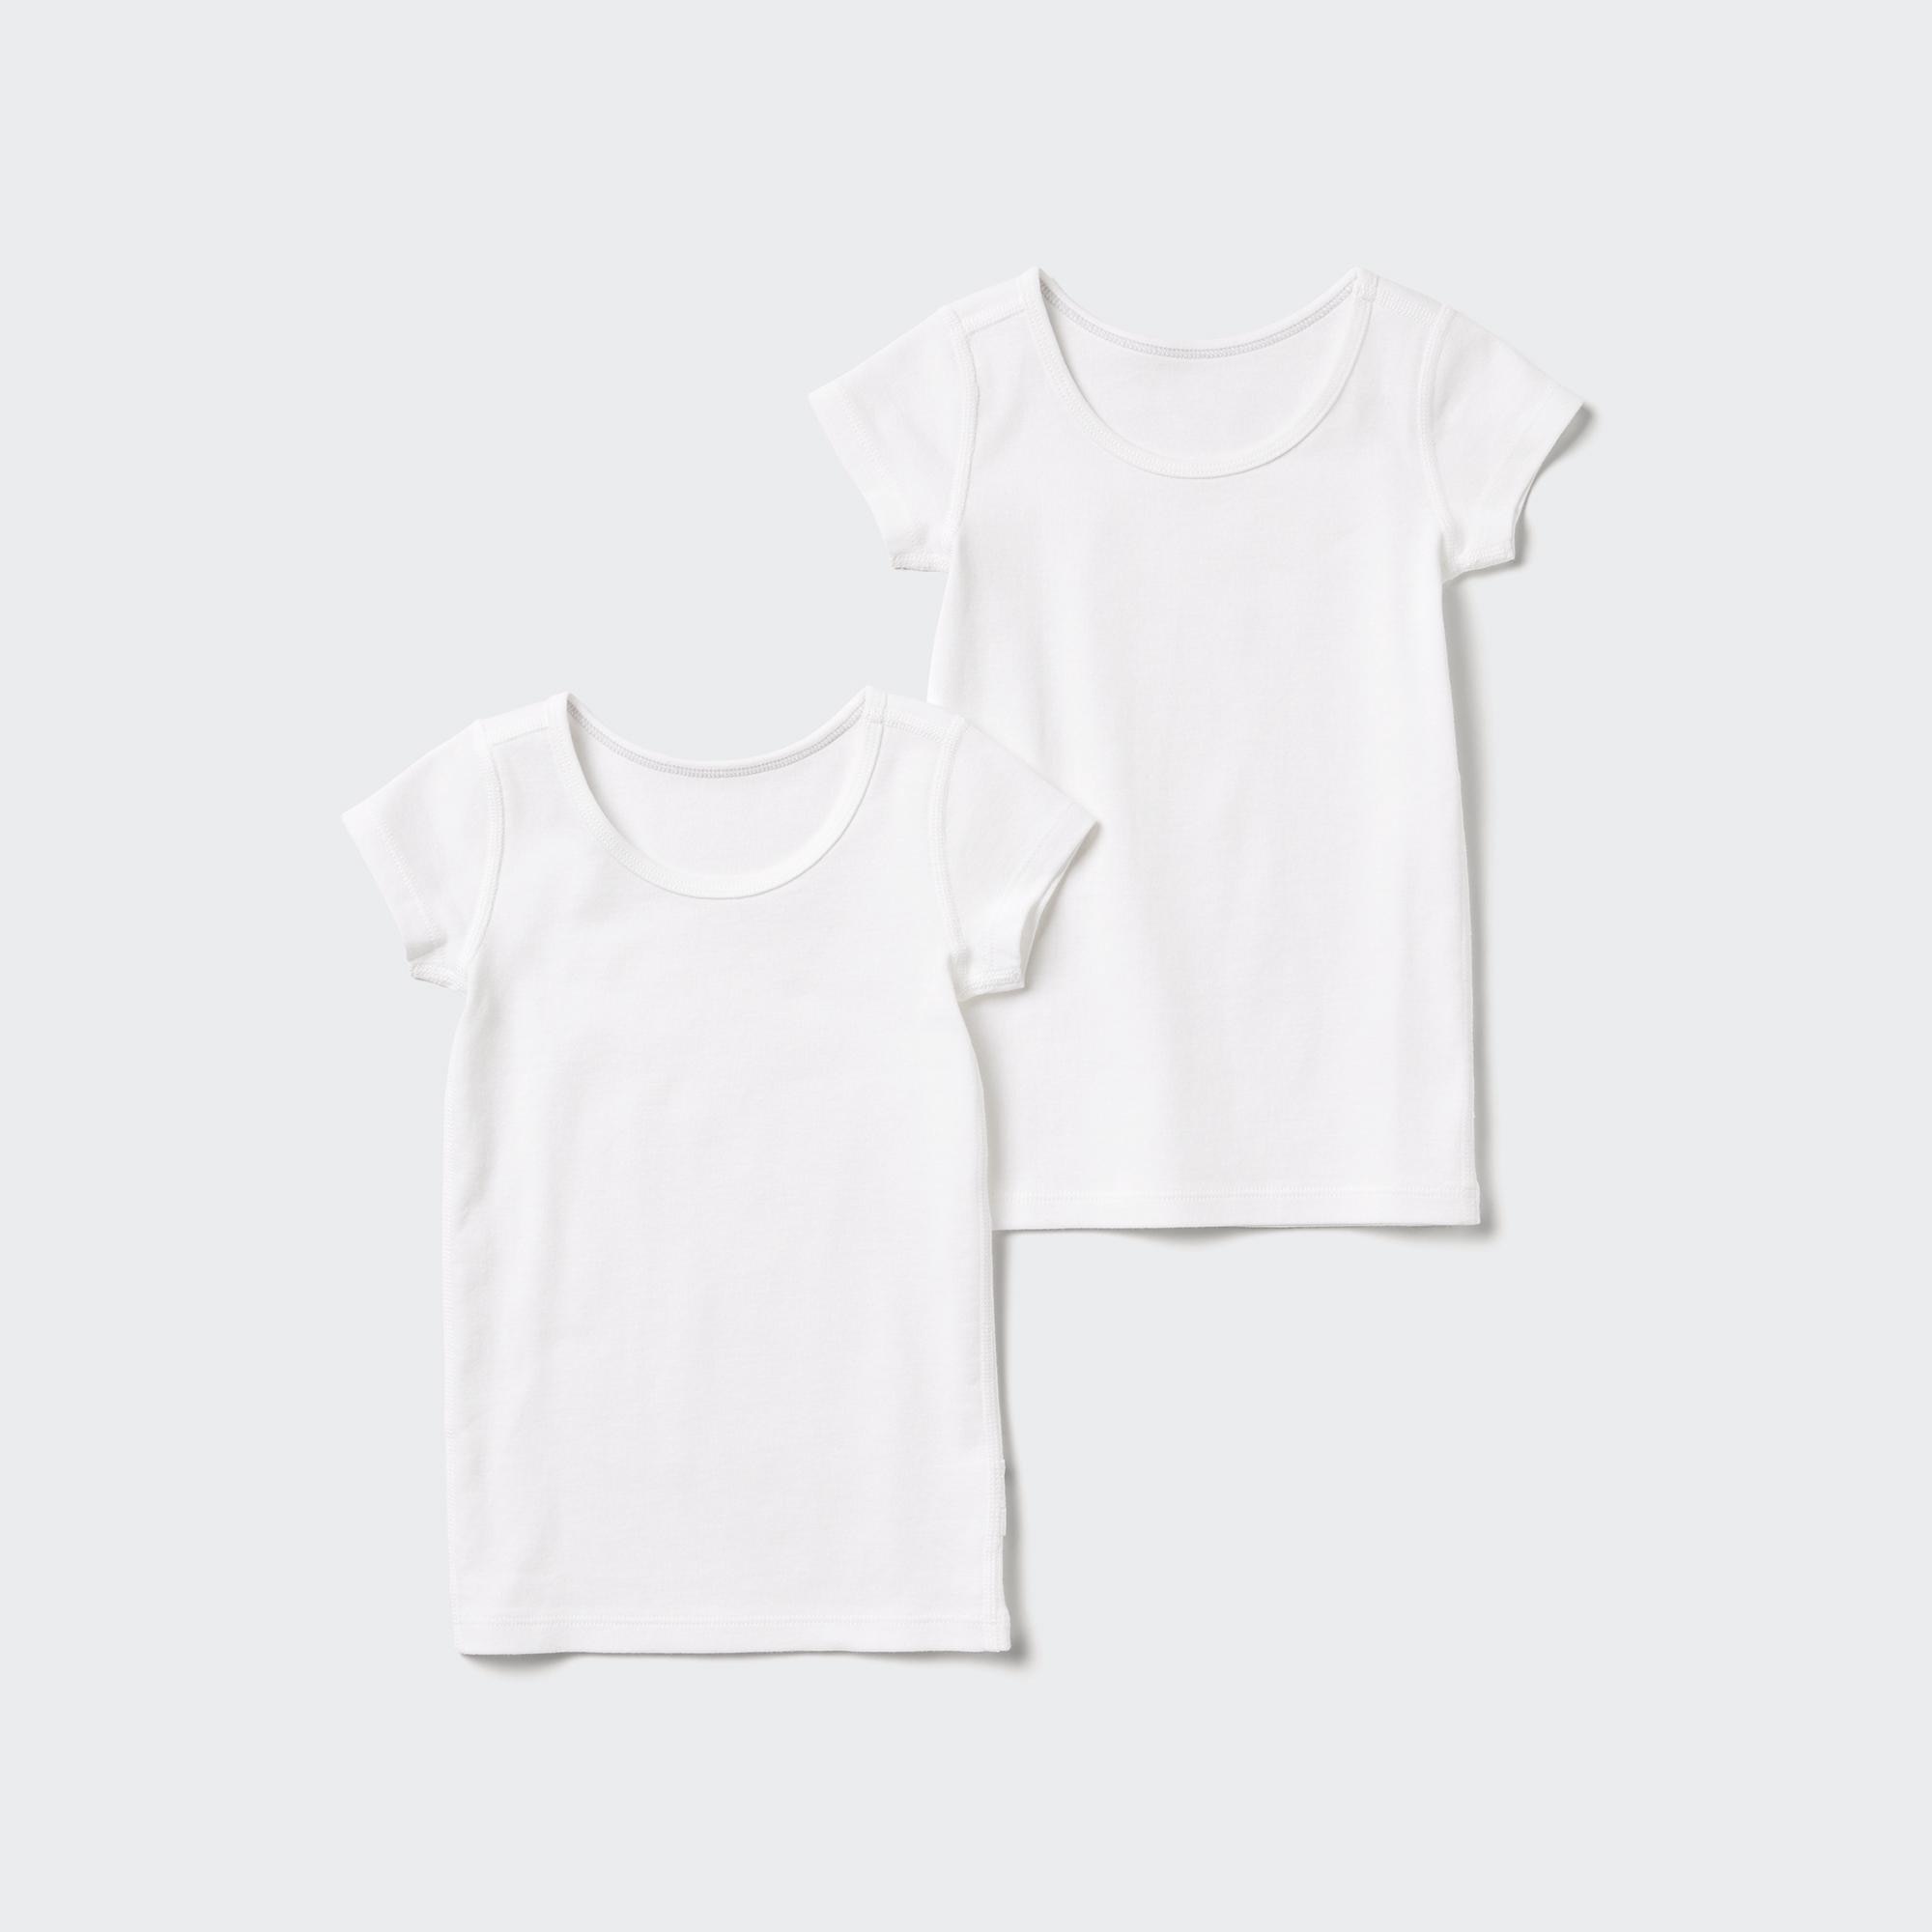 Cotton Ribbed T-Shirt (2 Pack)